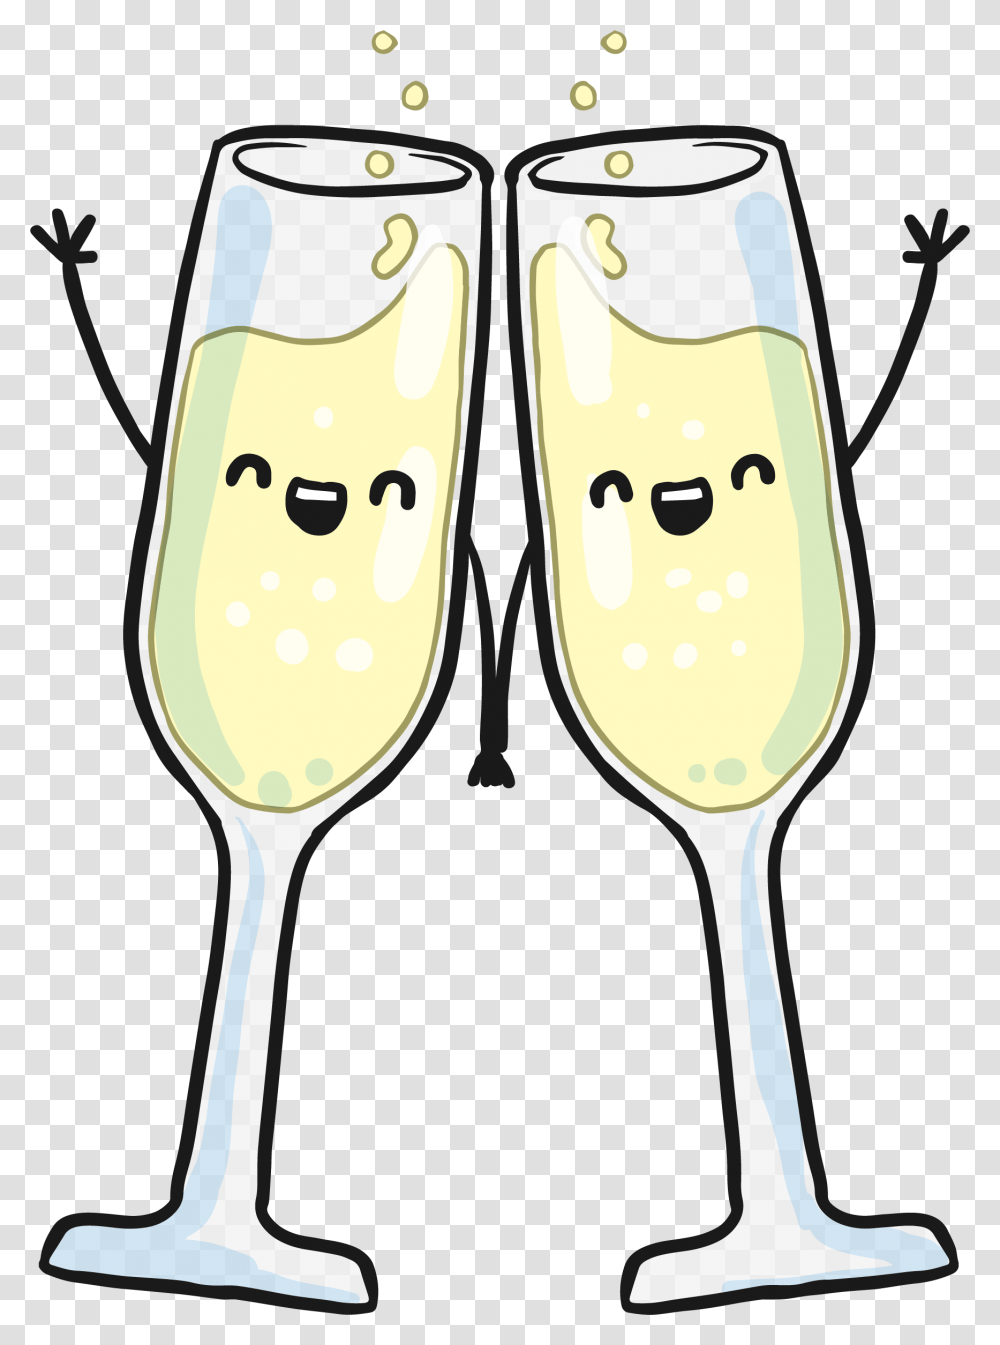 Champagne Glasses Toast Cartoon Champagne Glass, Beverage, Drink, Alcohol, Wine Transparent Png